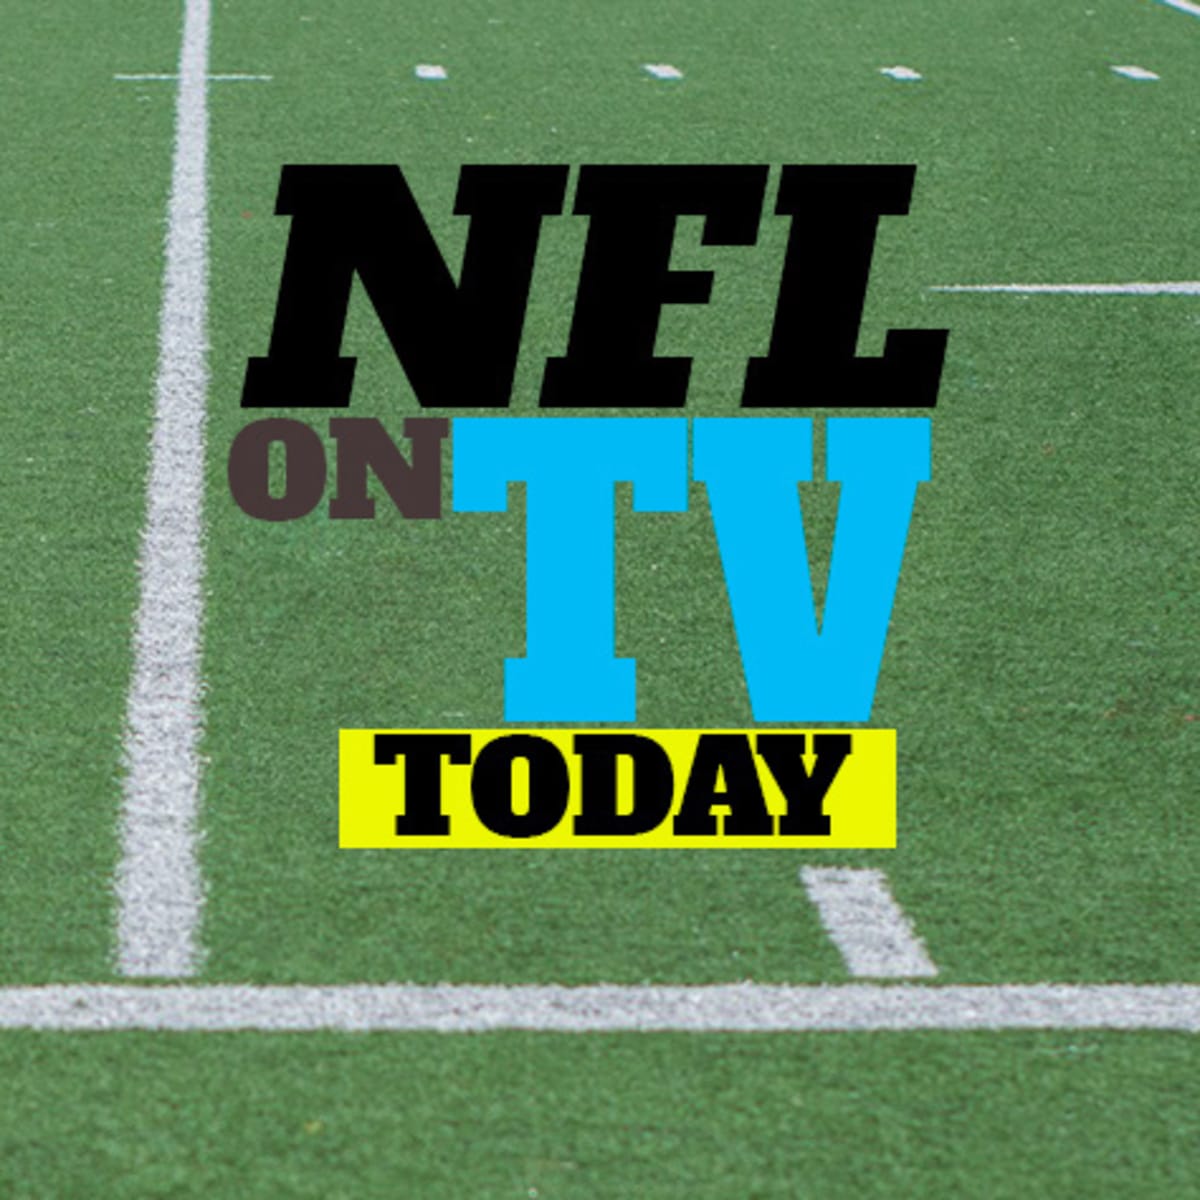 what nfl games are on cable today